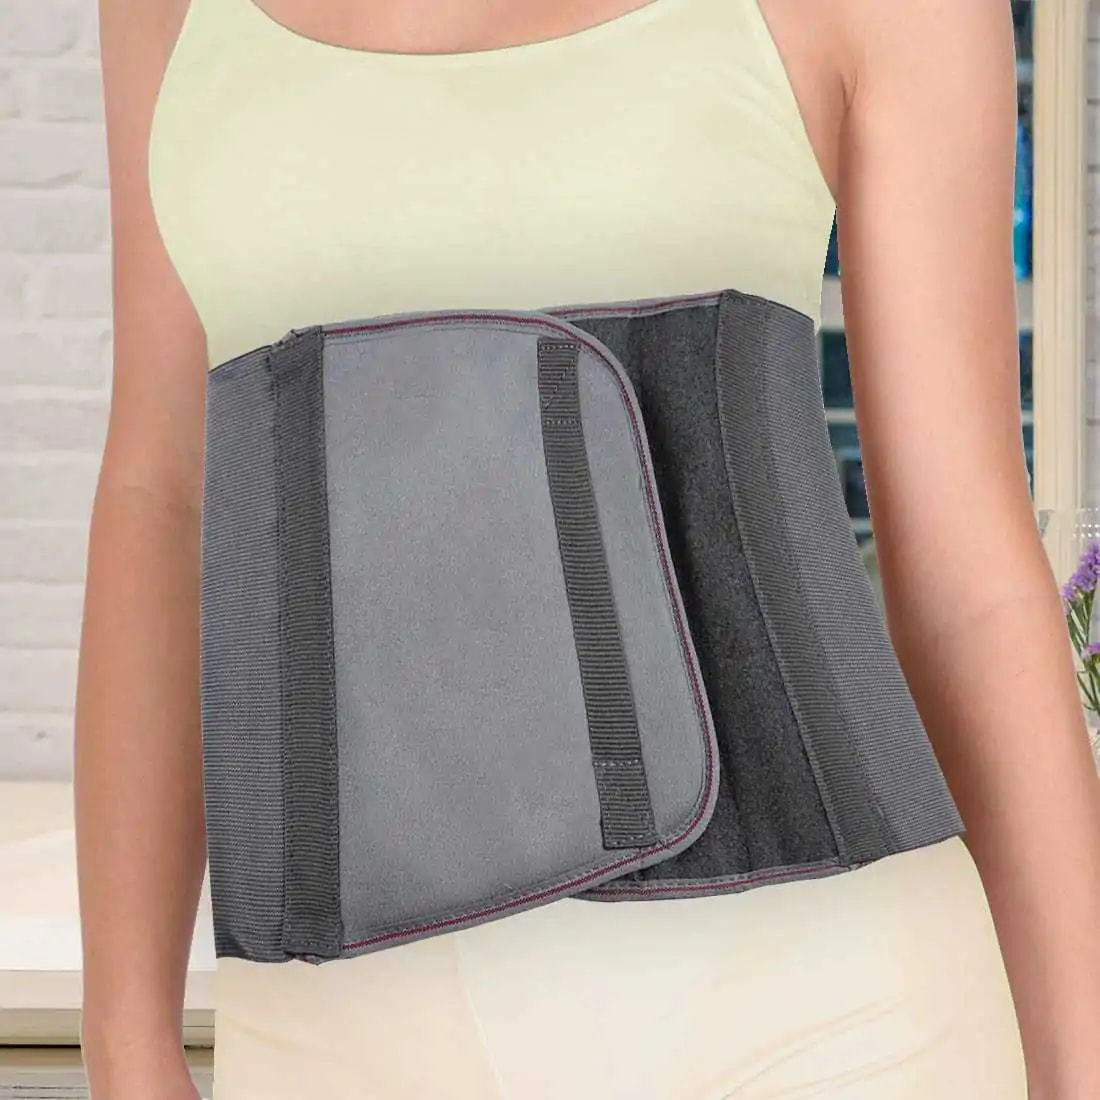 Post Pregnancy Support & Recovery Belt for Compression Support - XXL